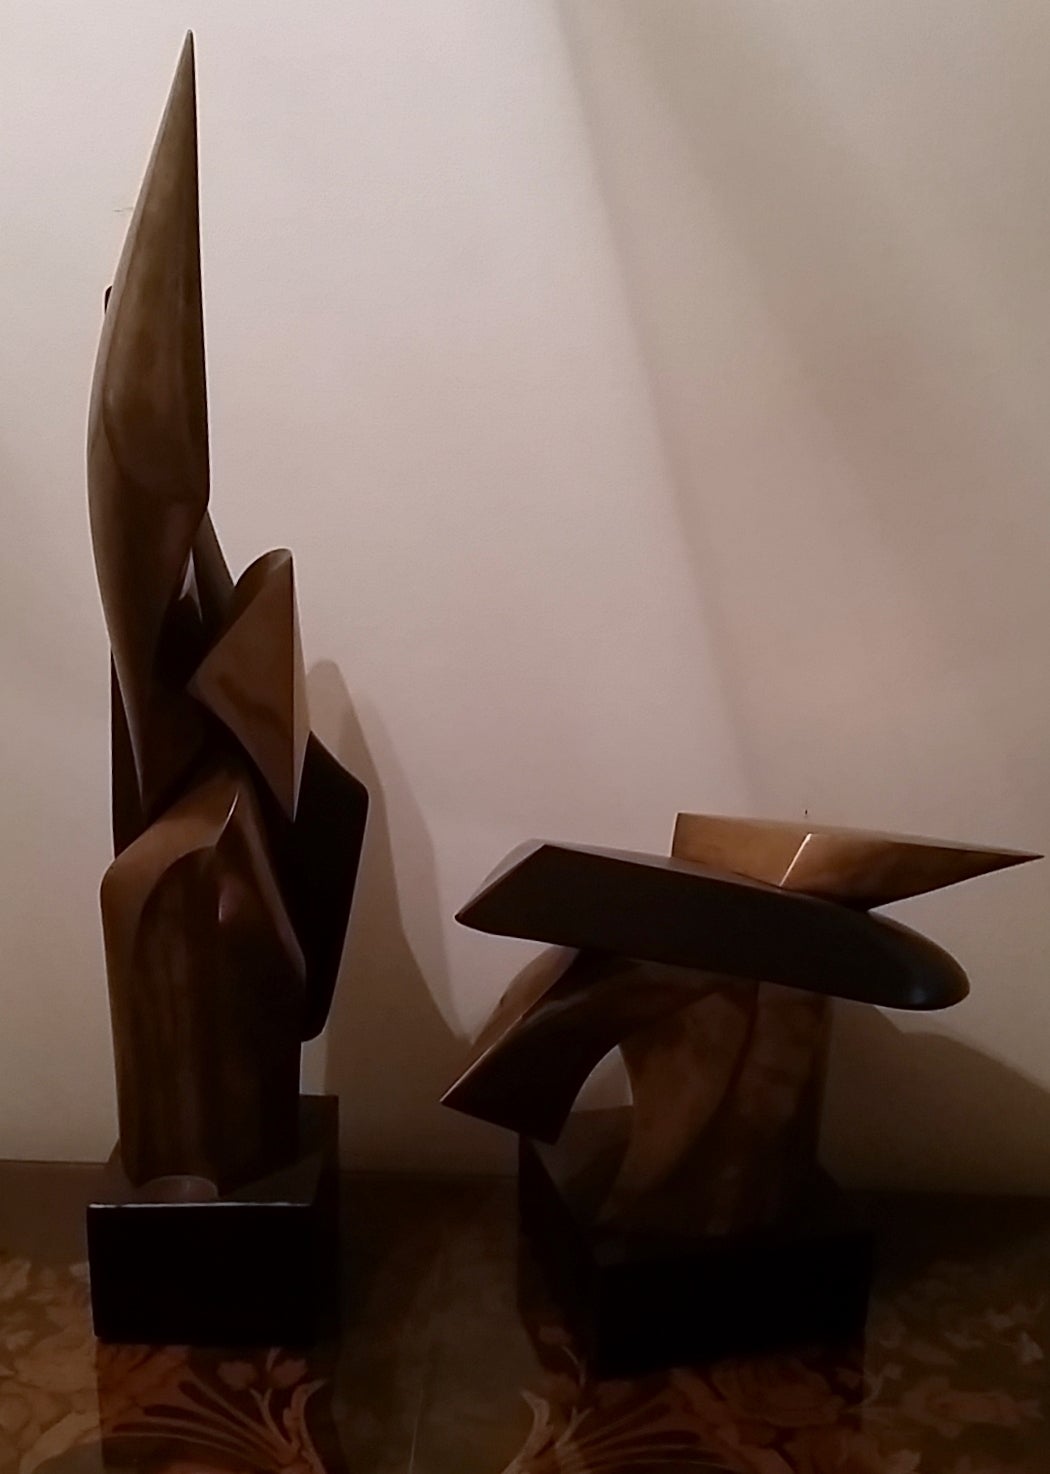 Two Karoly Veress abstract bronze sculptures.

Free shipping within the United States and Canada.

Karoly Veress (Dalnoki Veress, Karoly) was born in 1935 in the rugged mountains of Transylvania. The upheaval of the Second World War forced him